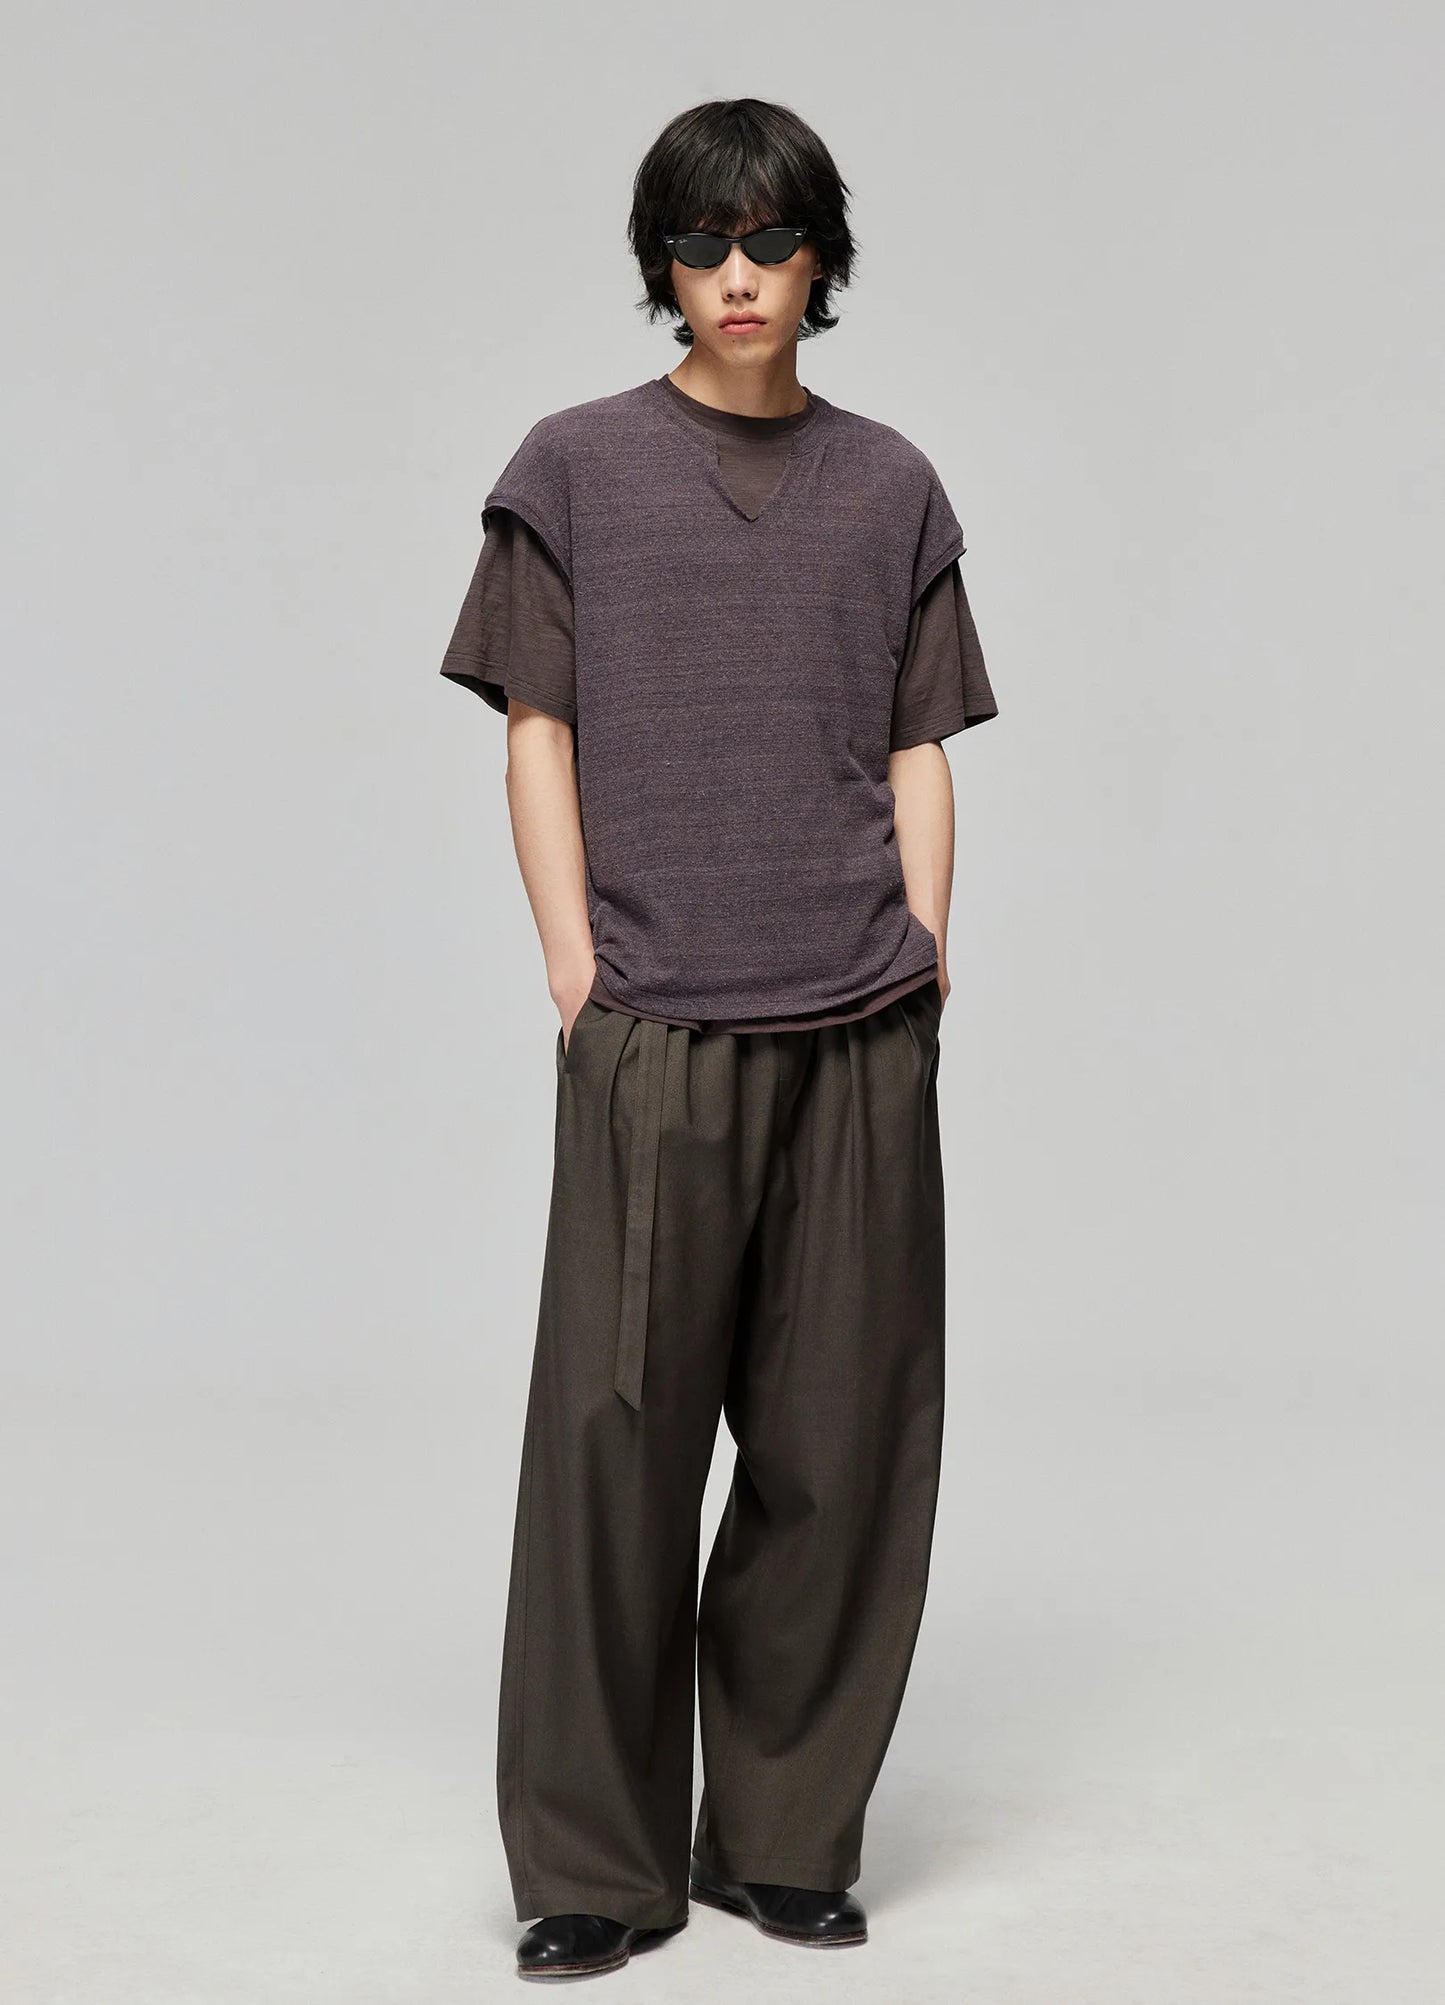 Wide Pleated Stretch Trousers